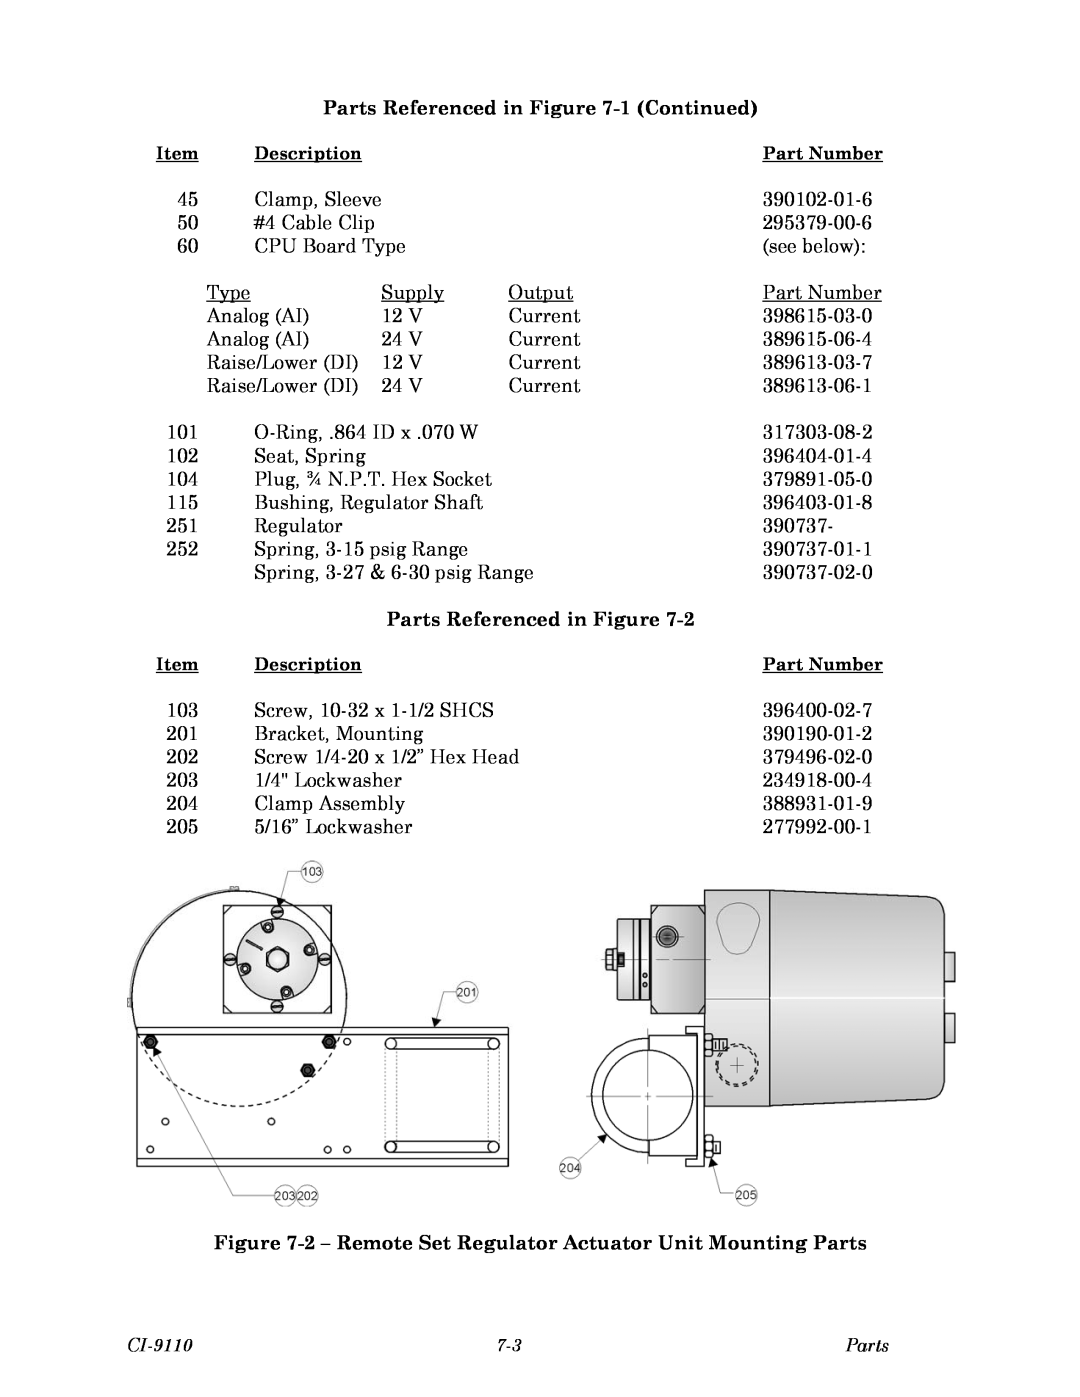 Emerson Process Management Series 9110, CI-9110 Parts Referenced in -1 Continued, Parts Referenced in Figure, Part Number 